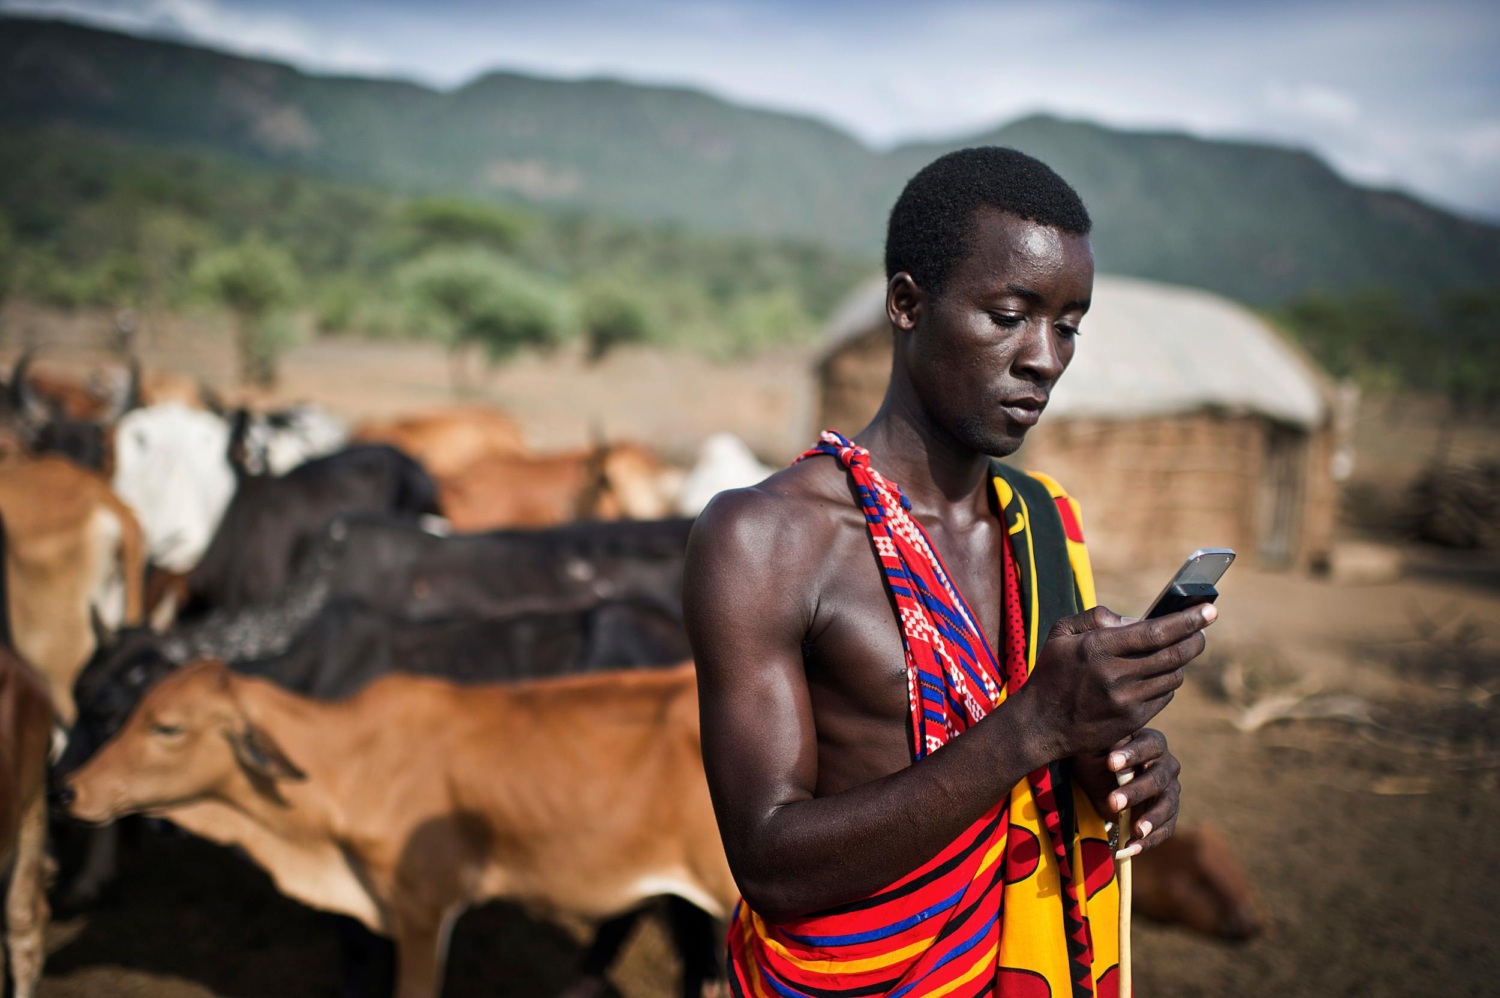 20 year old Maasai teacher Isaac Mkalia uses his mobile phone as he stands next to his pastoralist neighbor's cows.